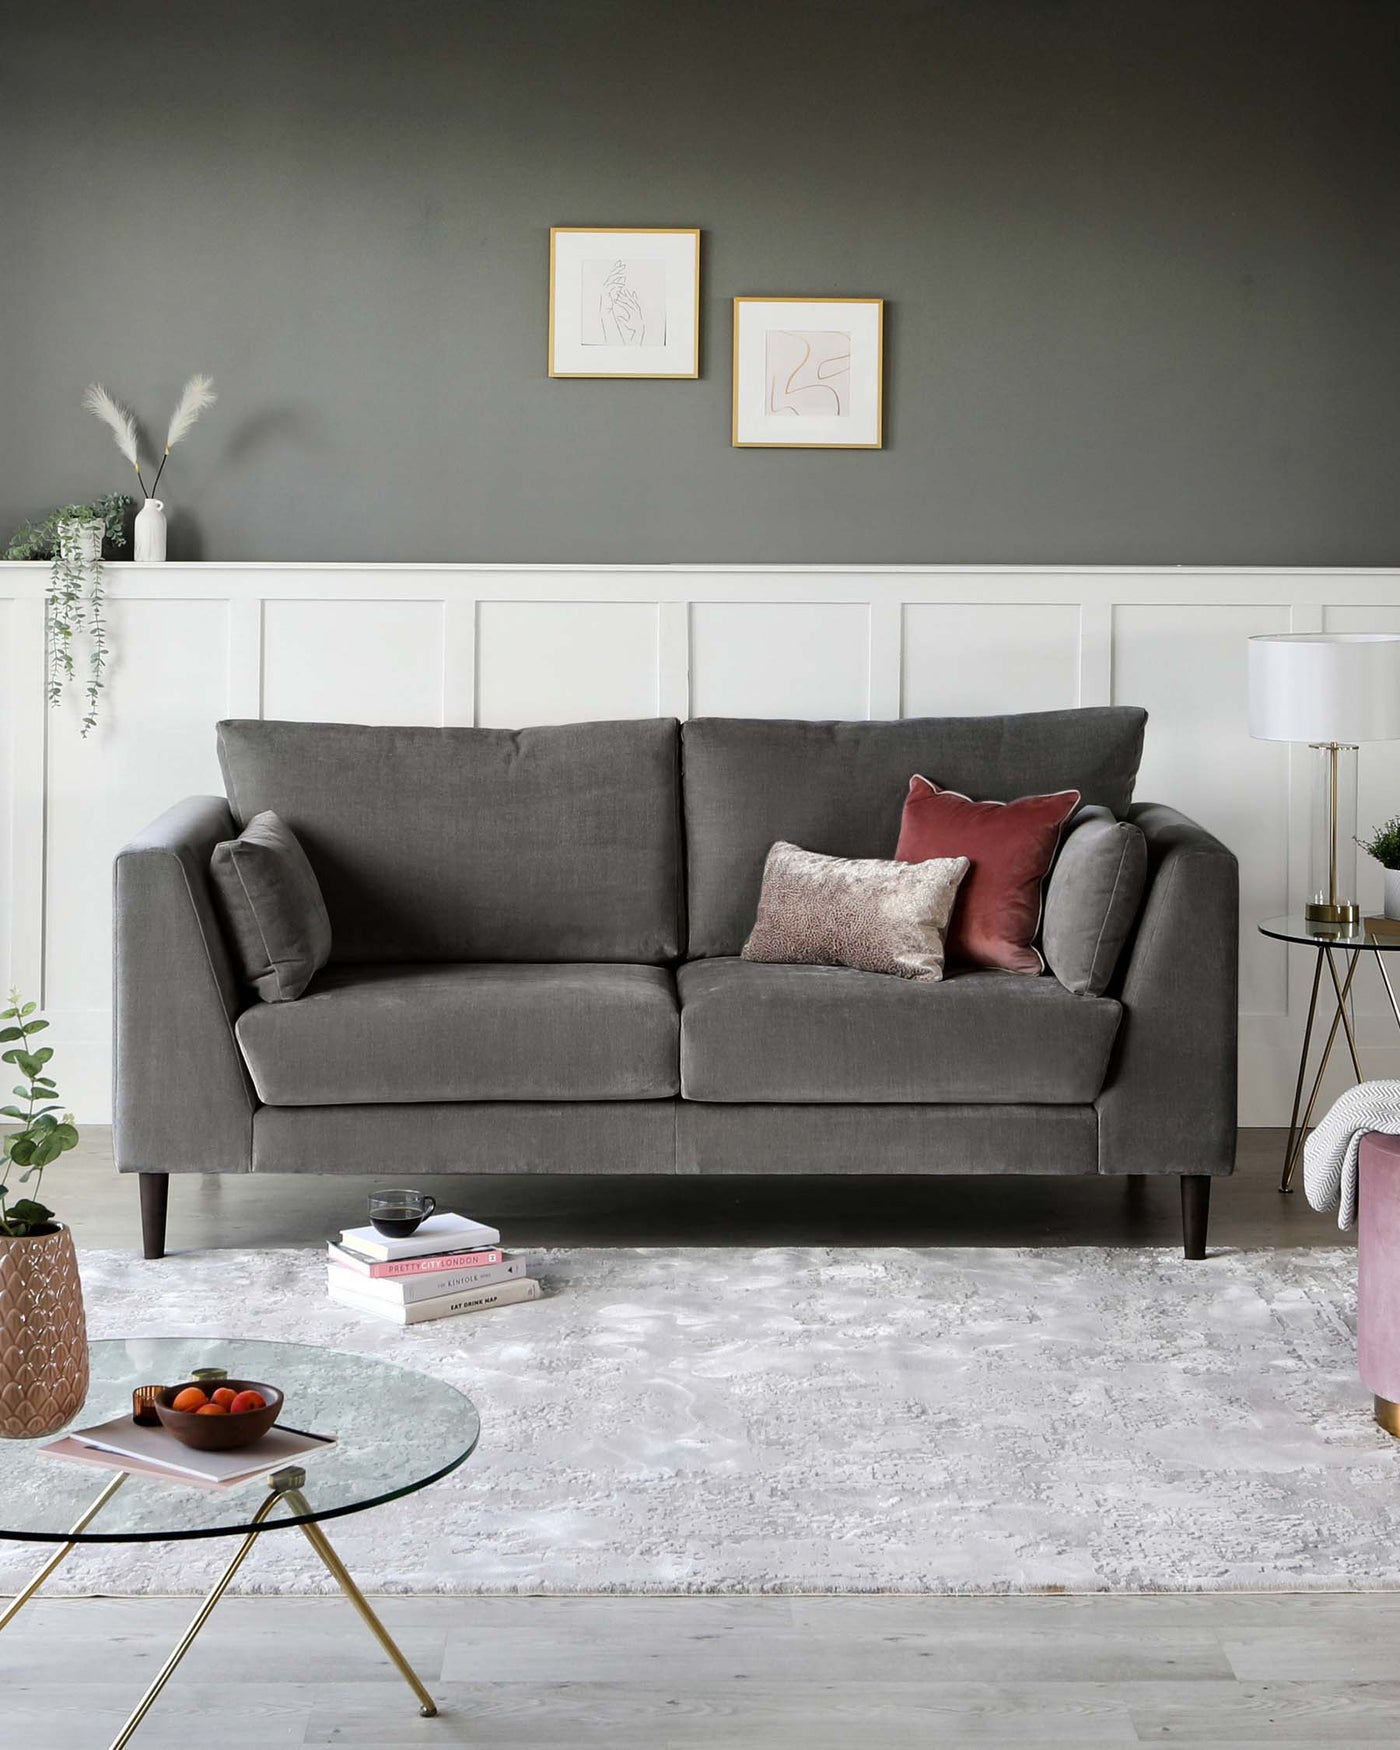 Elegant living room setup featuring a contemporary grey upholstered three-seater sofa with cushioned armrests, two grey throw pillows, and one each of dusty rose and metallic textured decorative cushions. A round glass-top side table with a gold-finished geometric base rests on a plush white area rug, accompanied by a small planter and books for accent. A modern white lamp with a clear stand and white shade complements the side table.